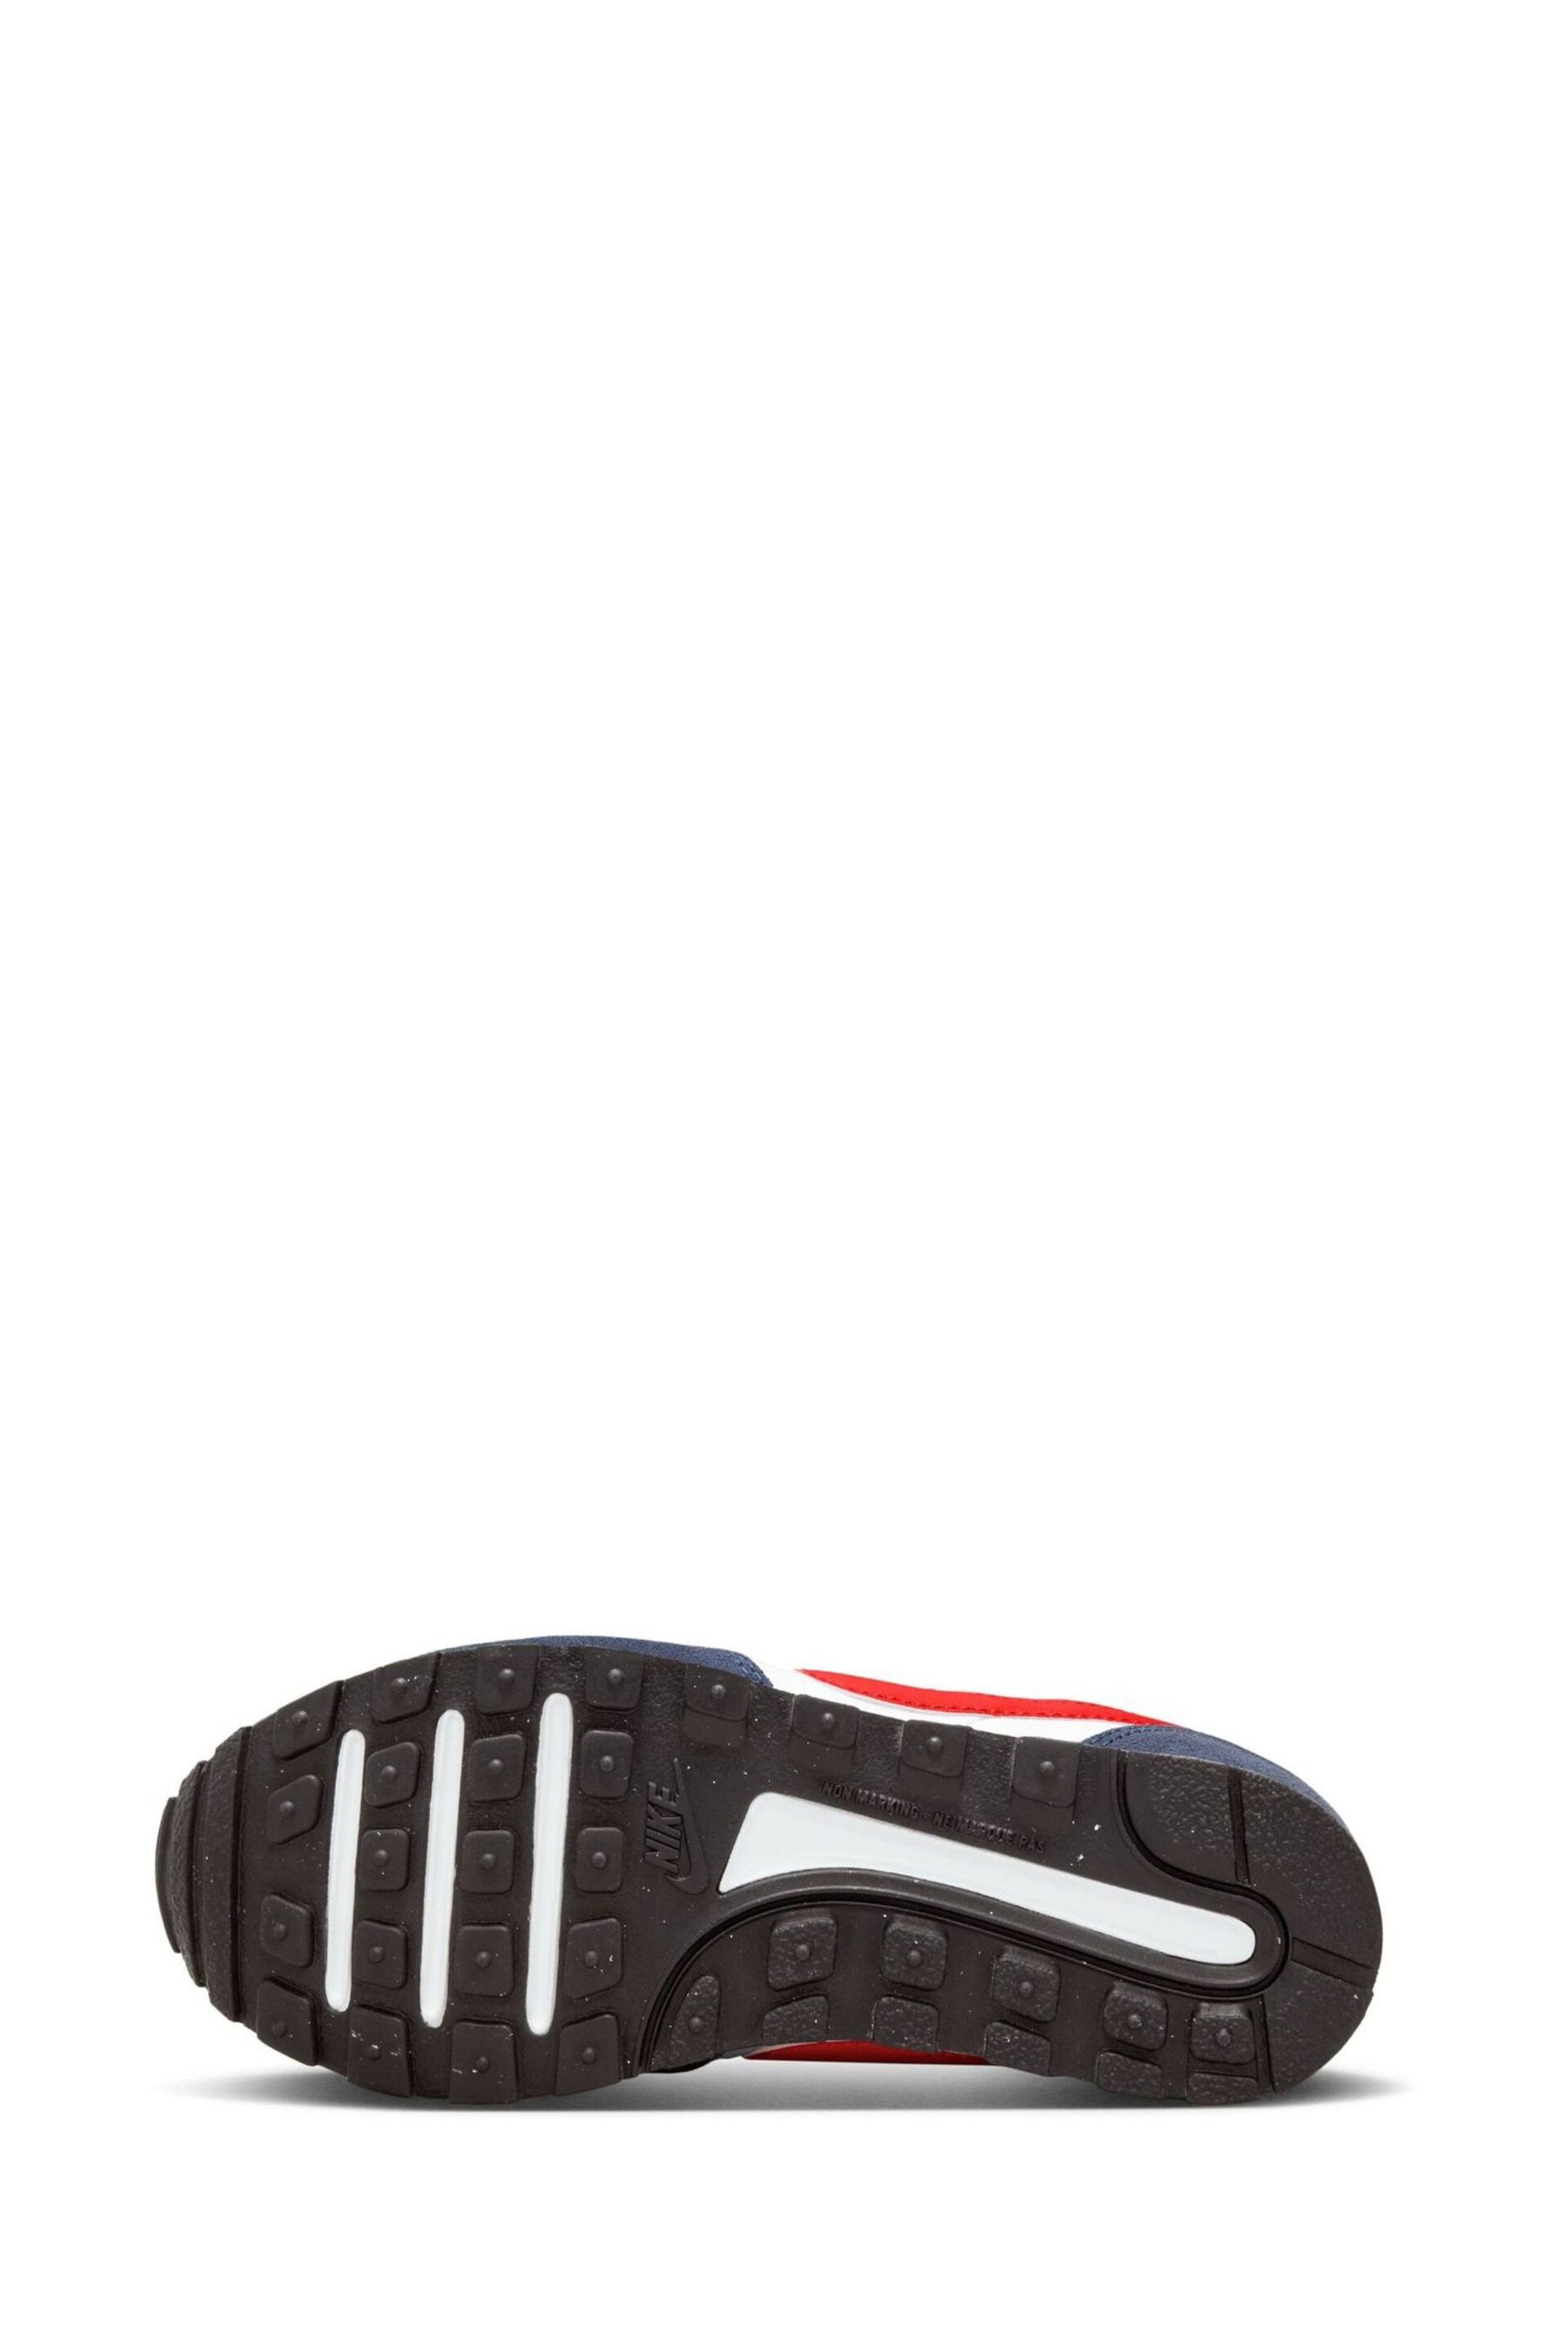 Nike Navy/White/Red Infant MD Valiant Trainers - Image 8 of 10